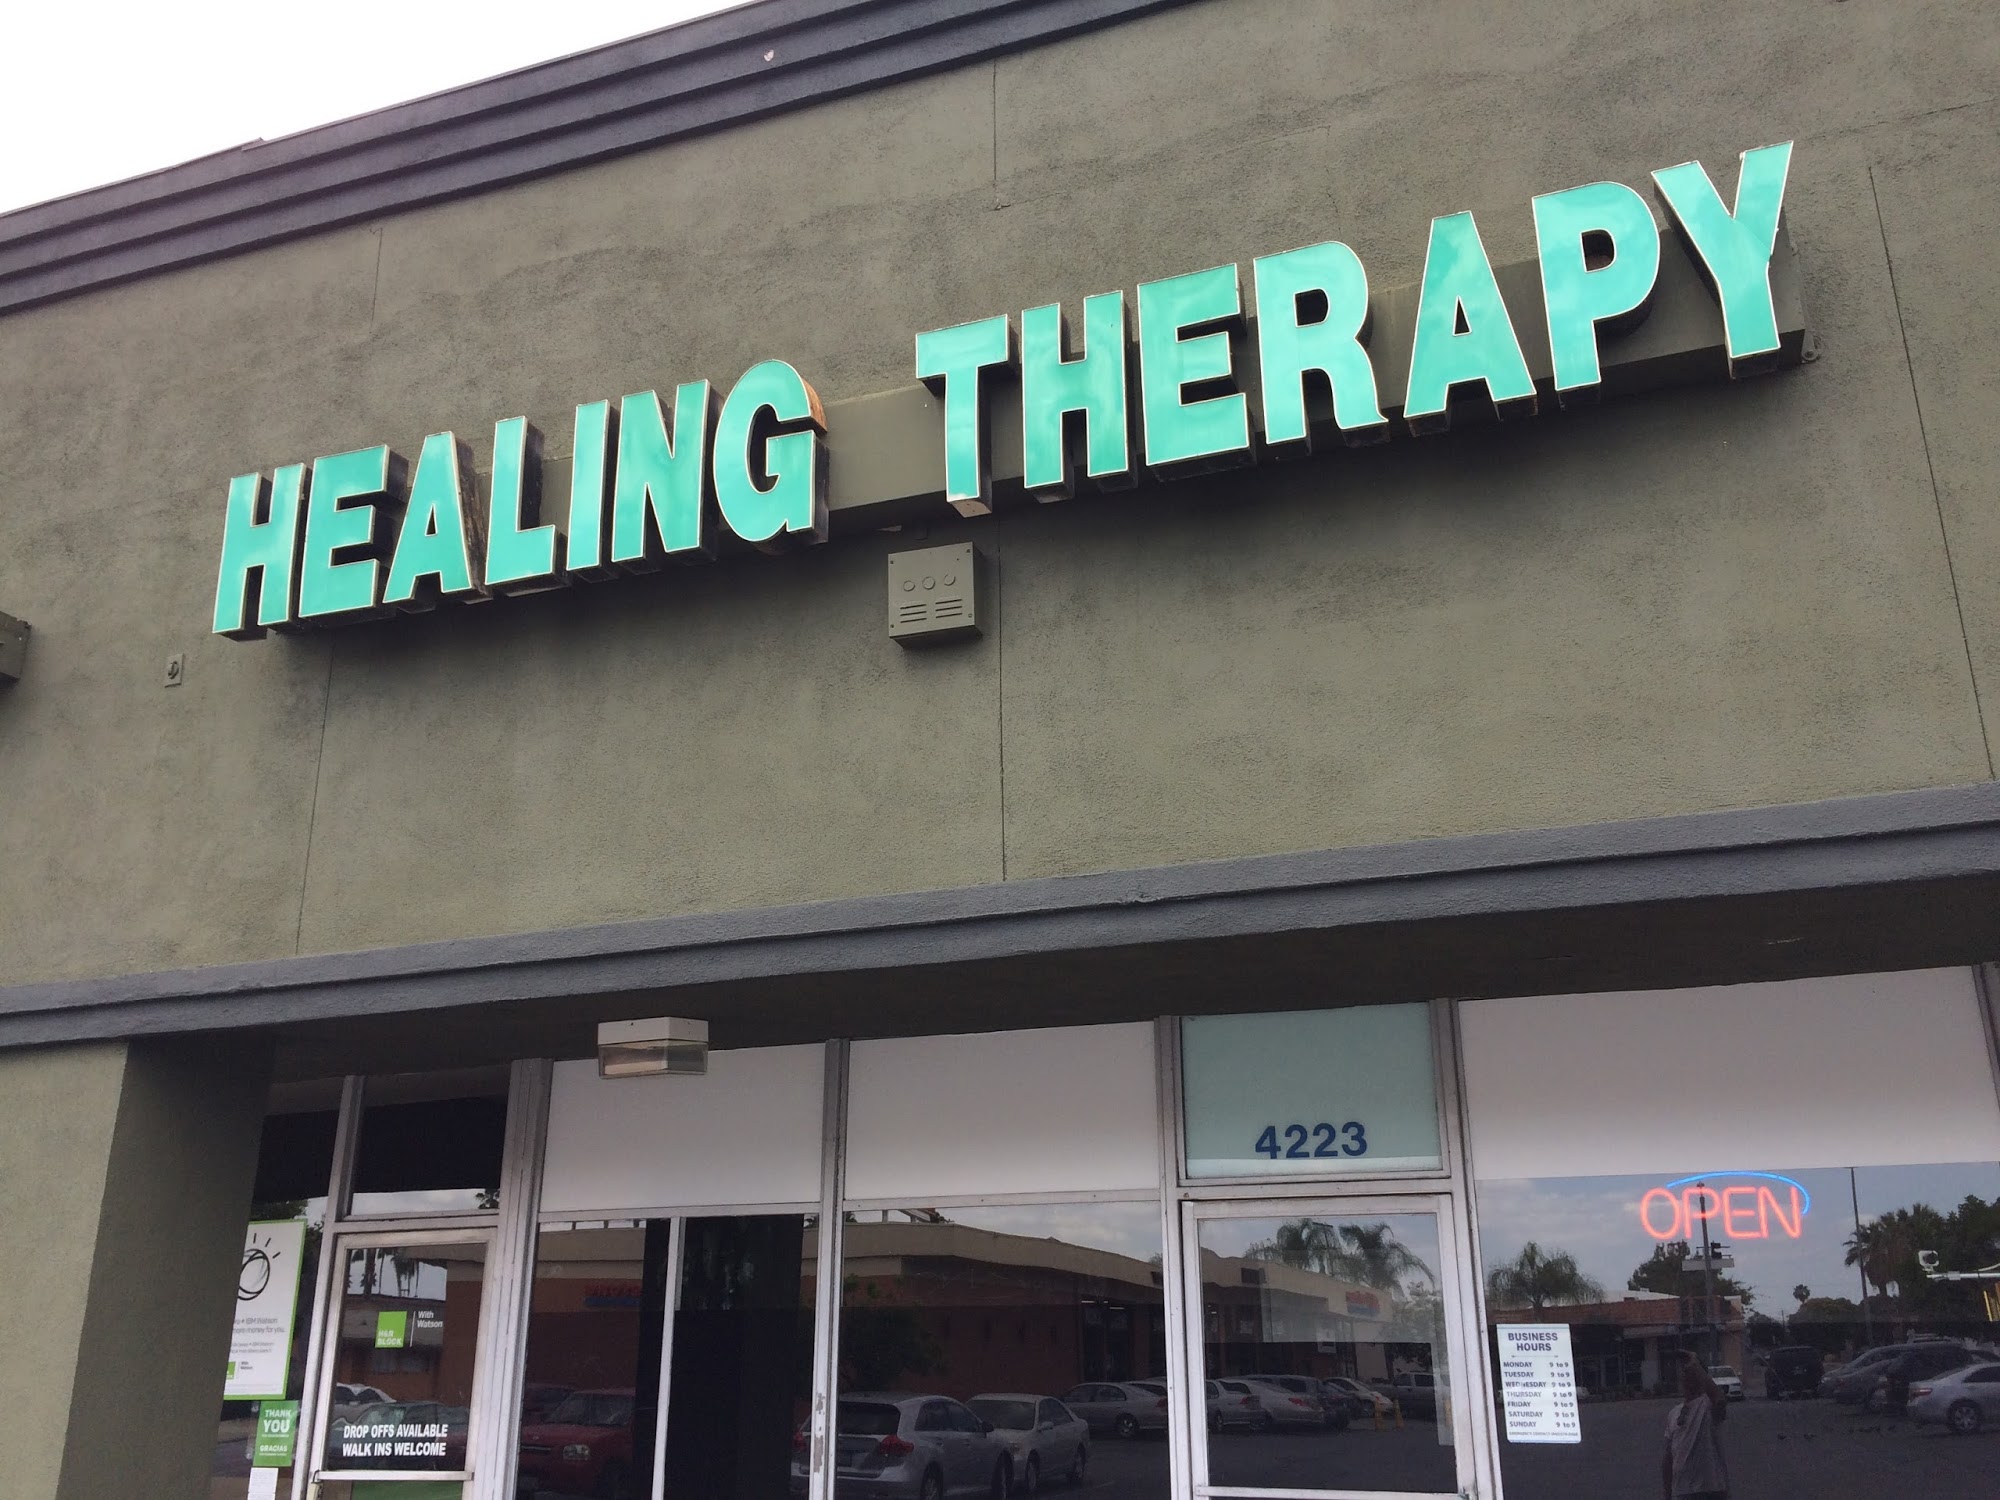 Healing Therapy